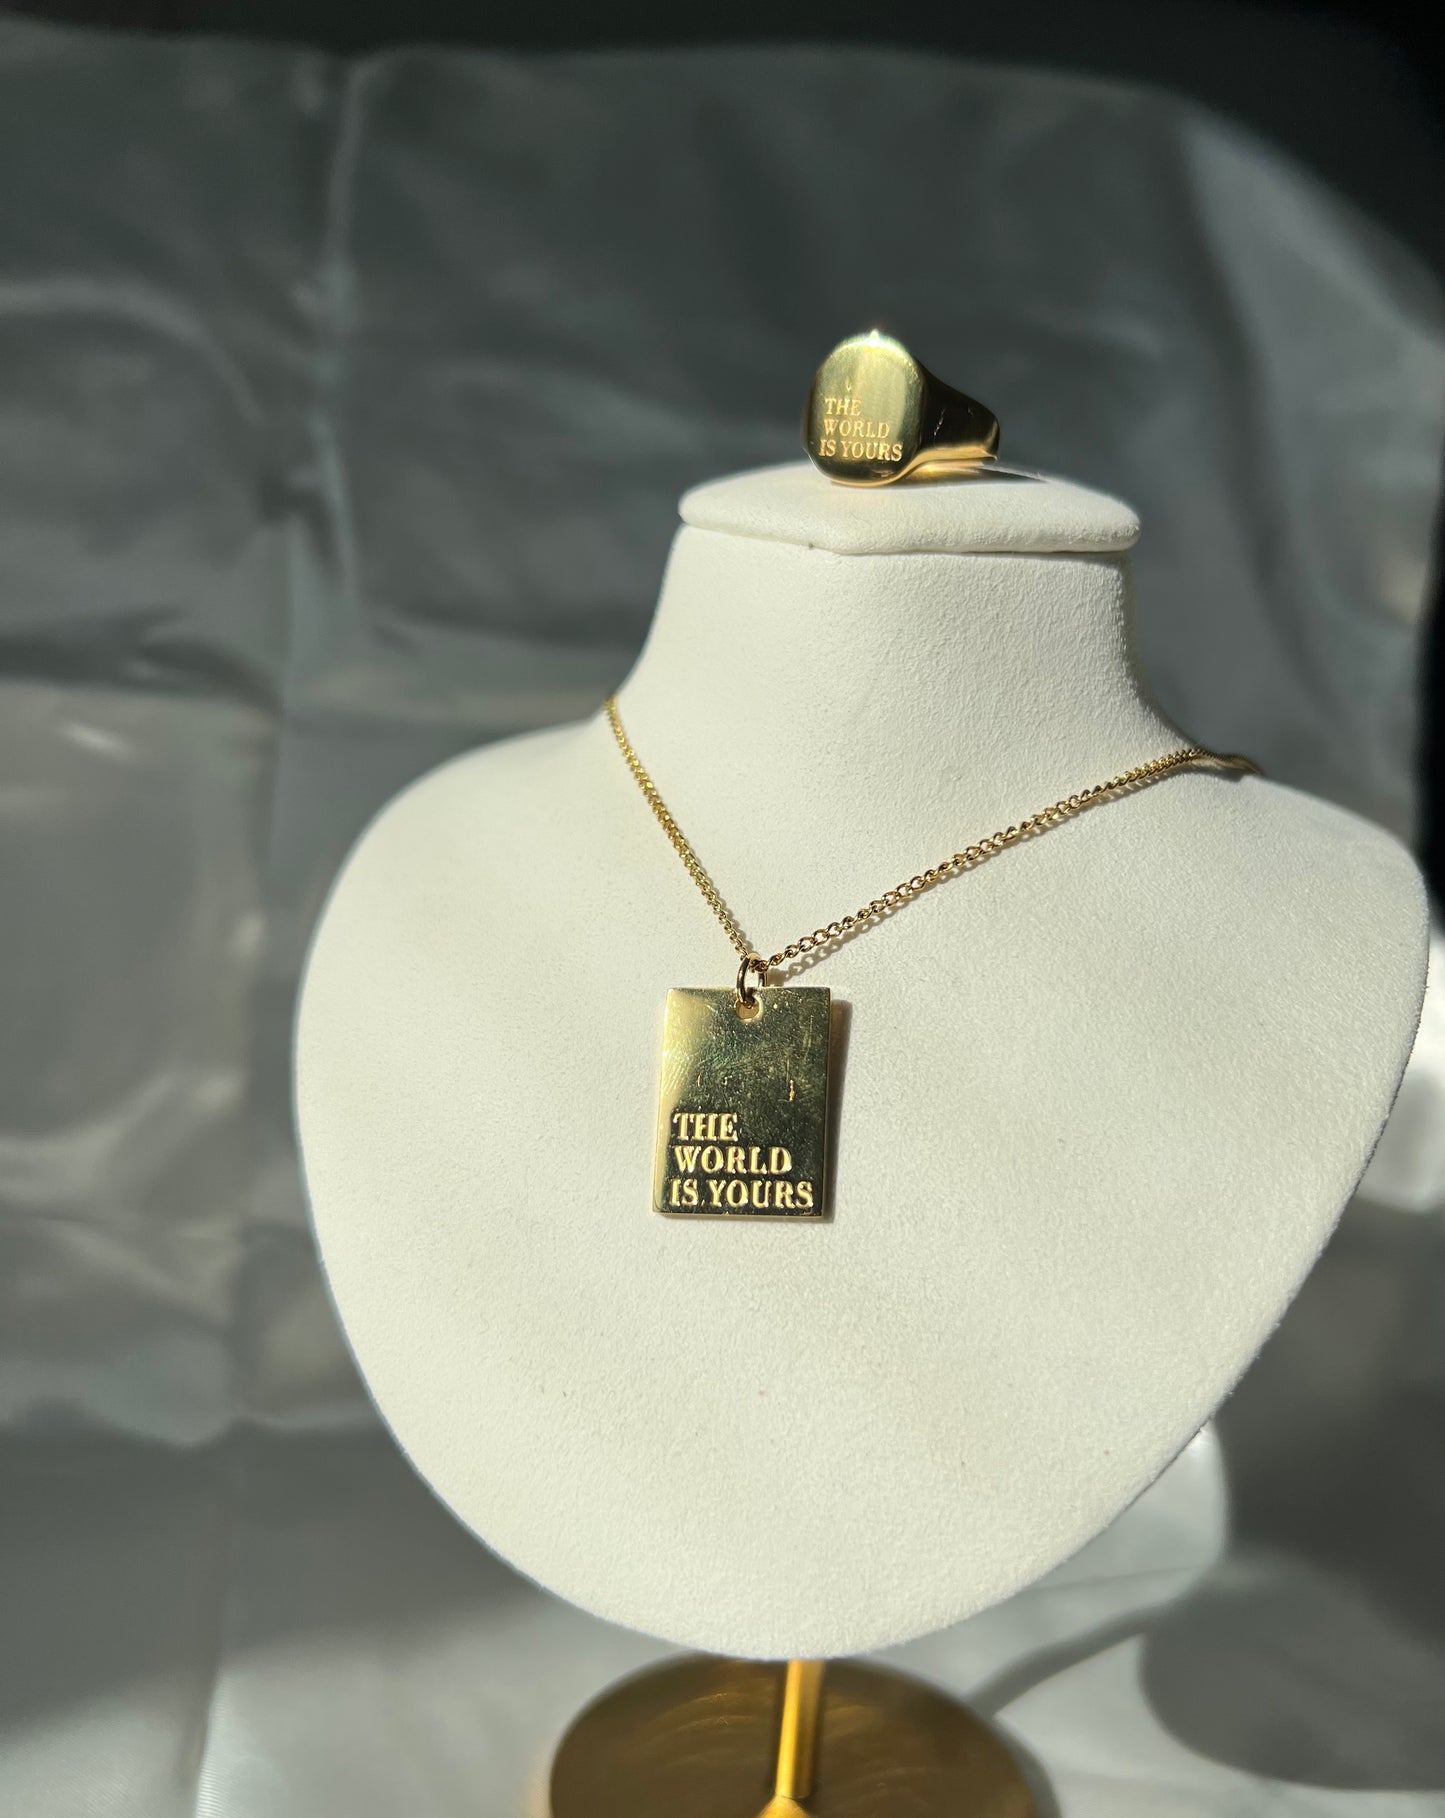 The world is yours Necklace